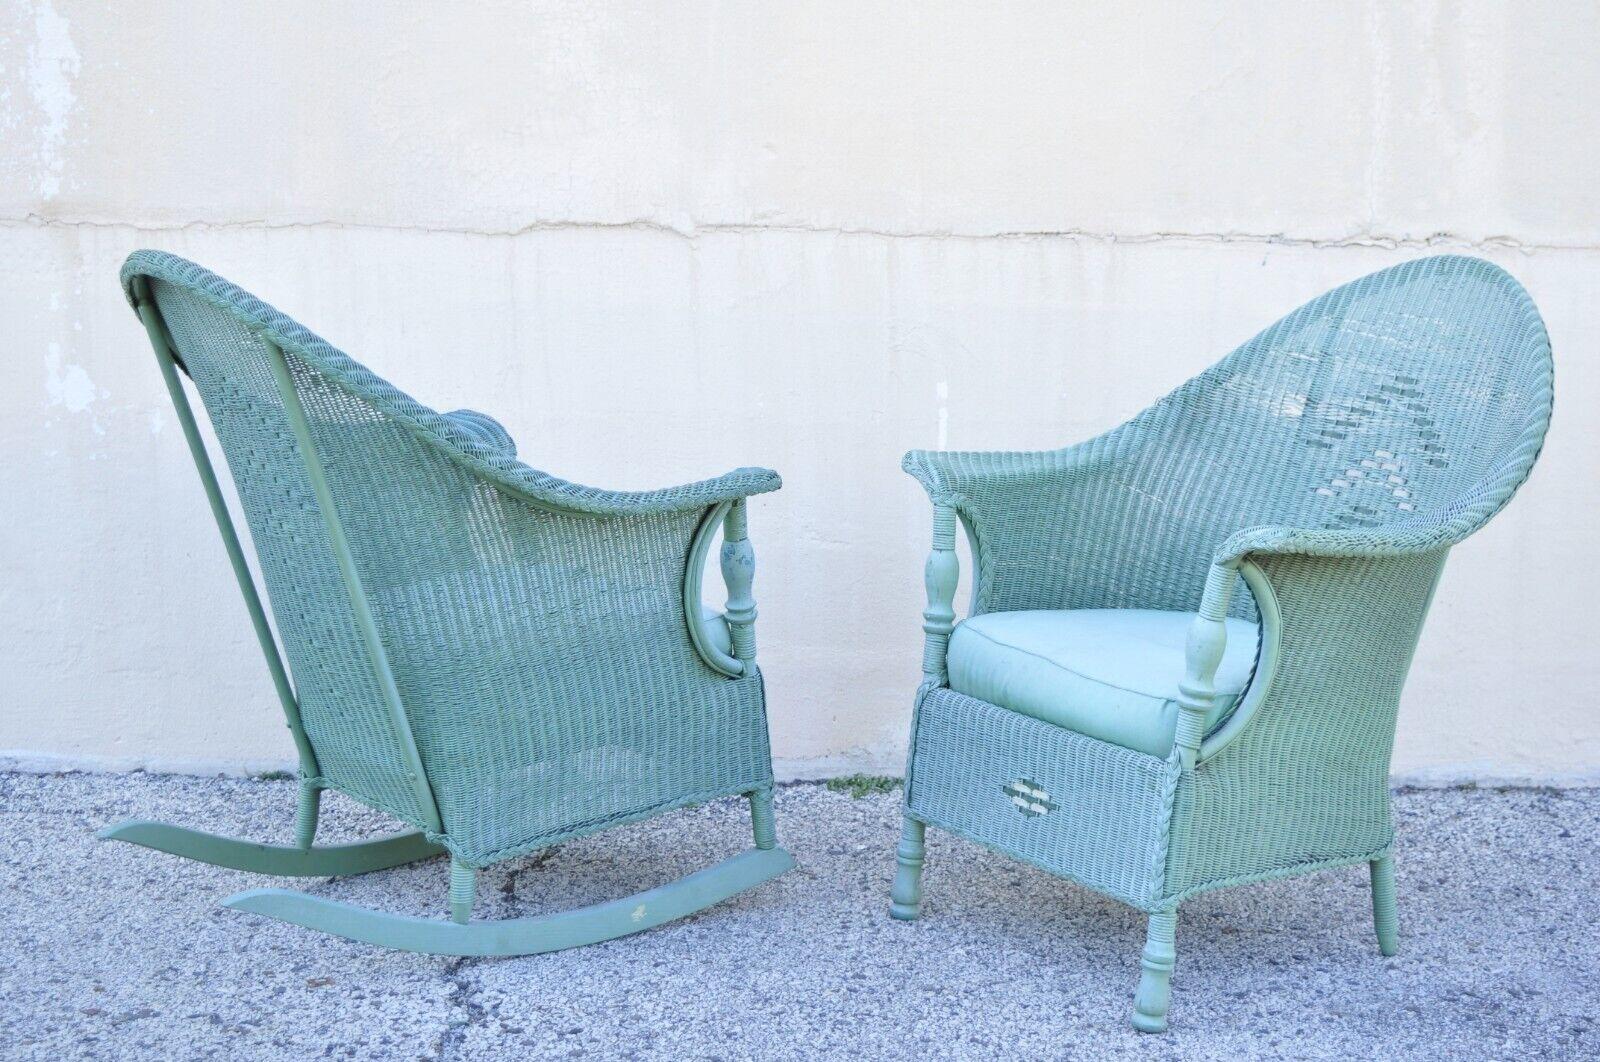 Victorian Blue Green Woven Wicker Sunroom Sofa Rocking Chair Lounge Chair 3 Pcs For Sale 1